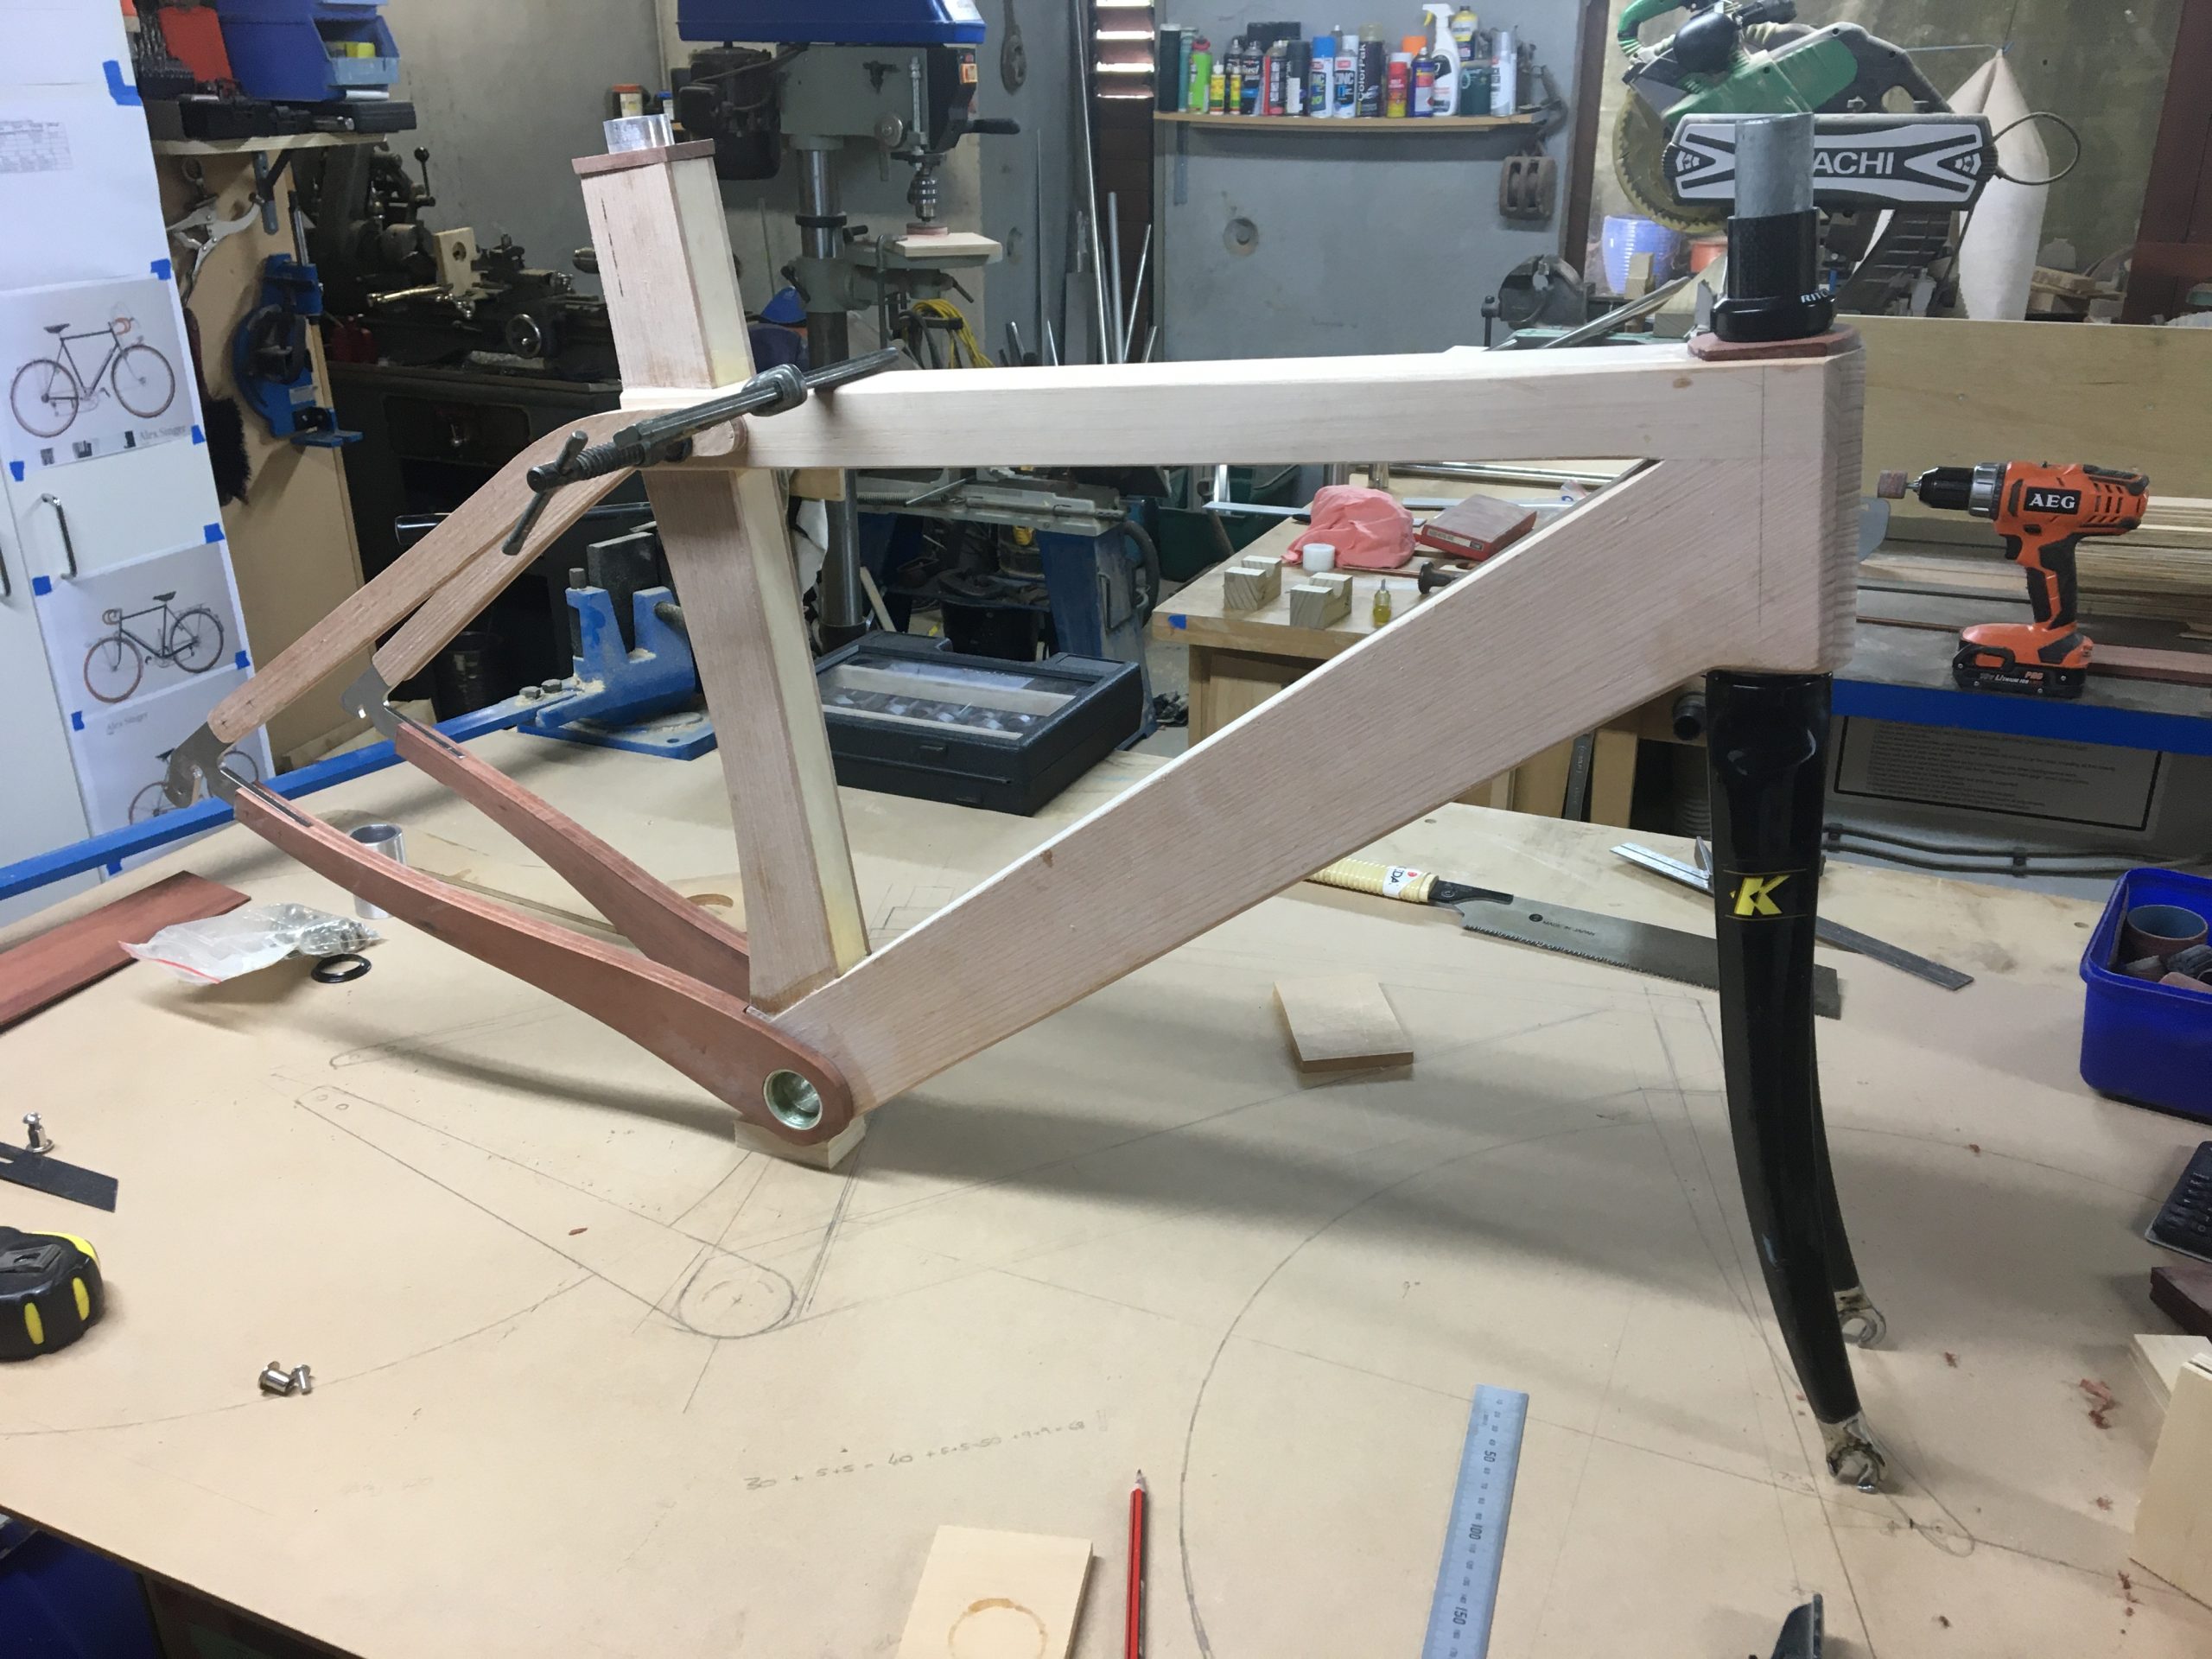 Build up of the Wooden Bike project